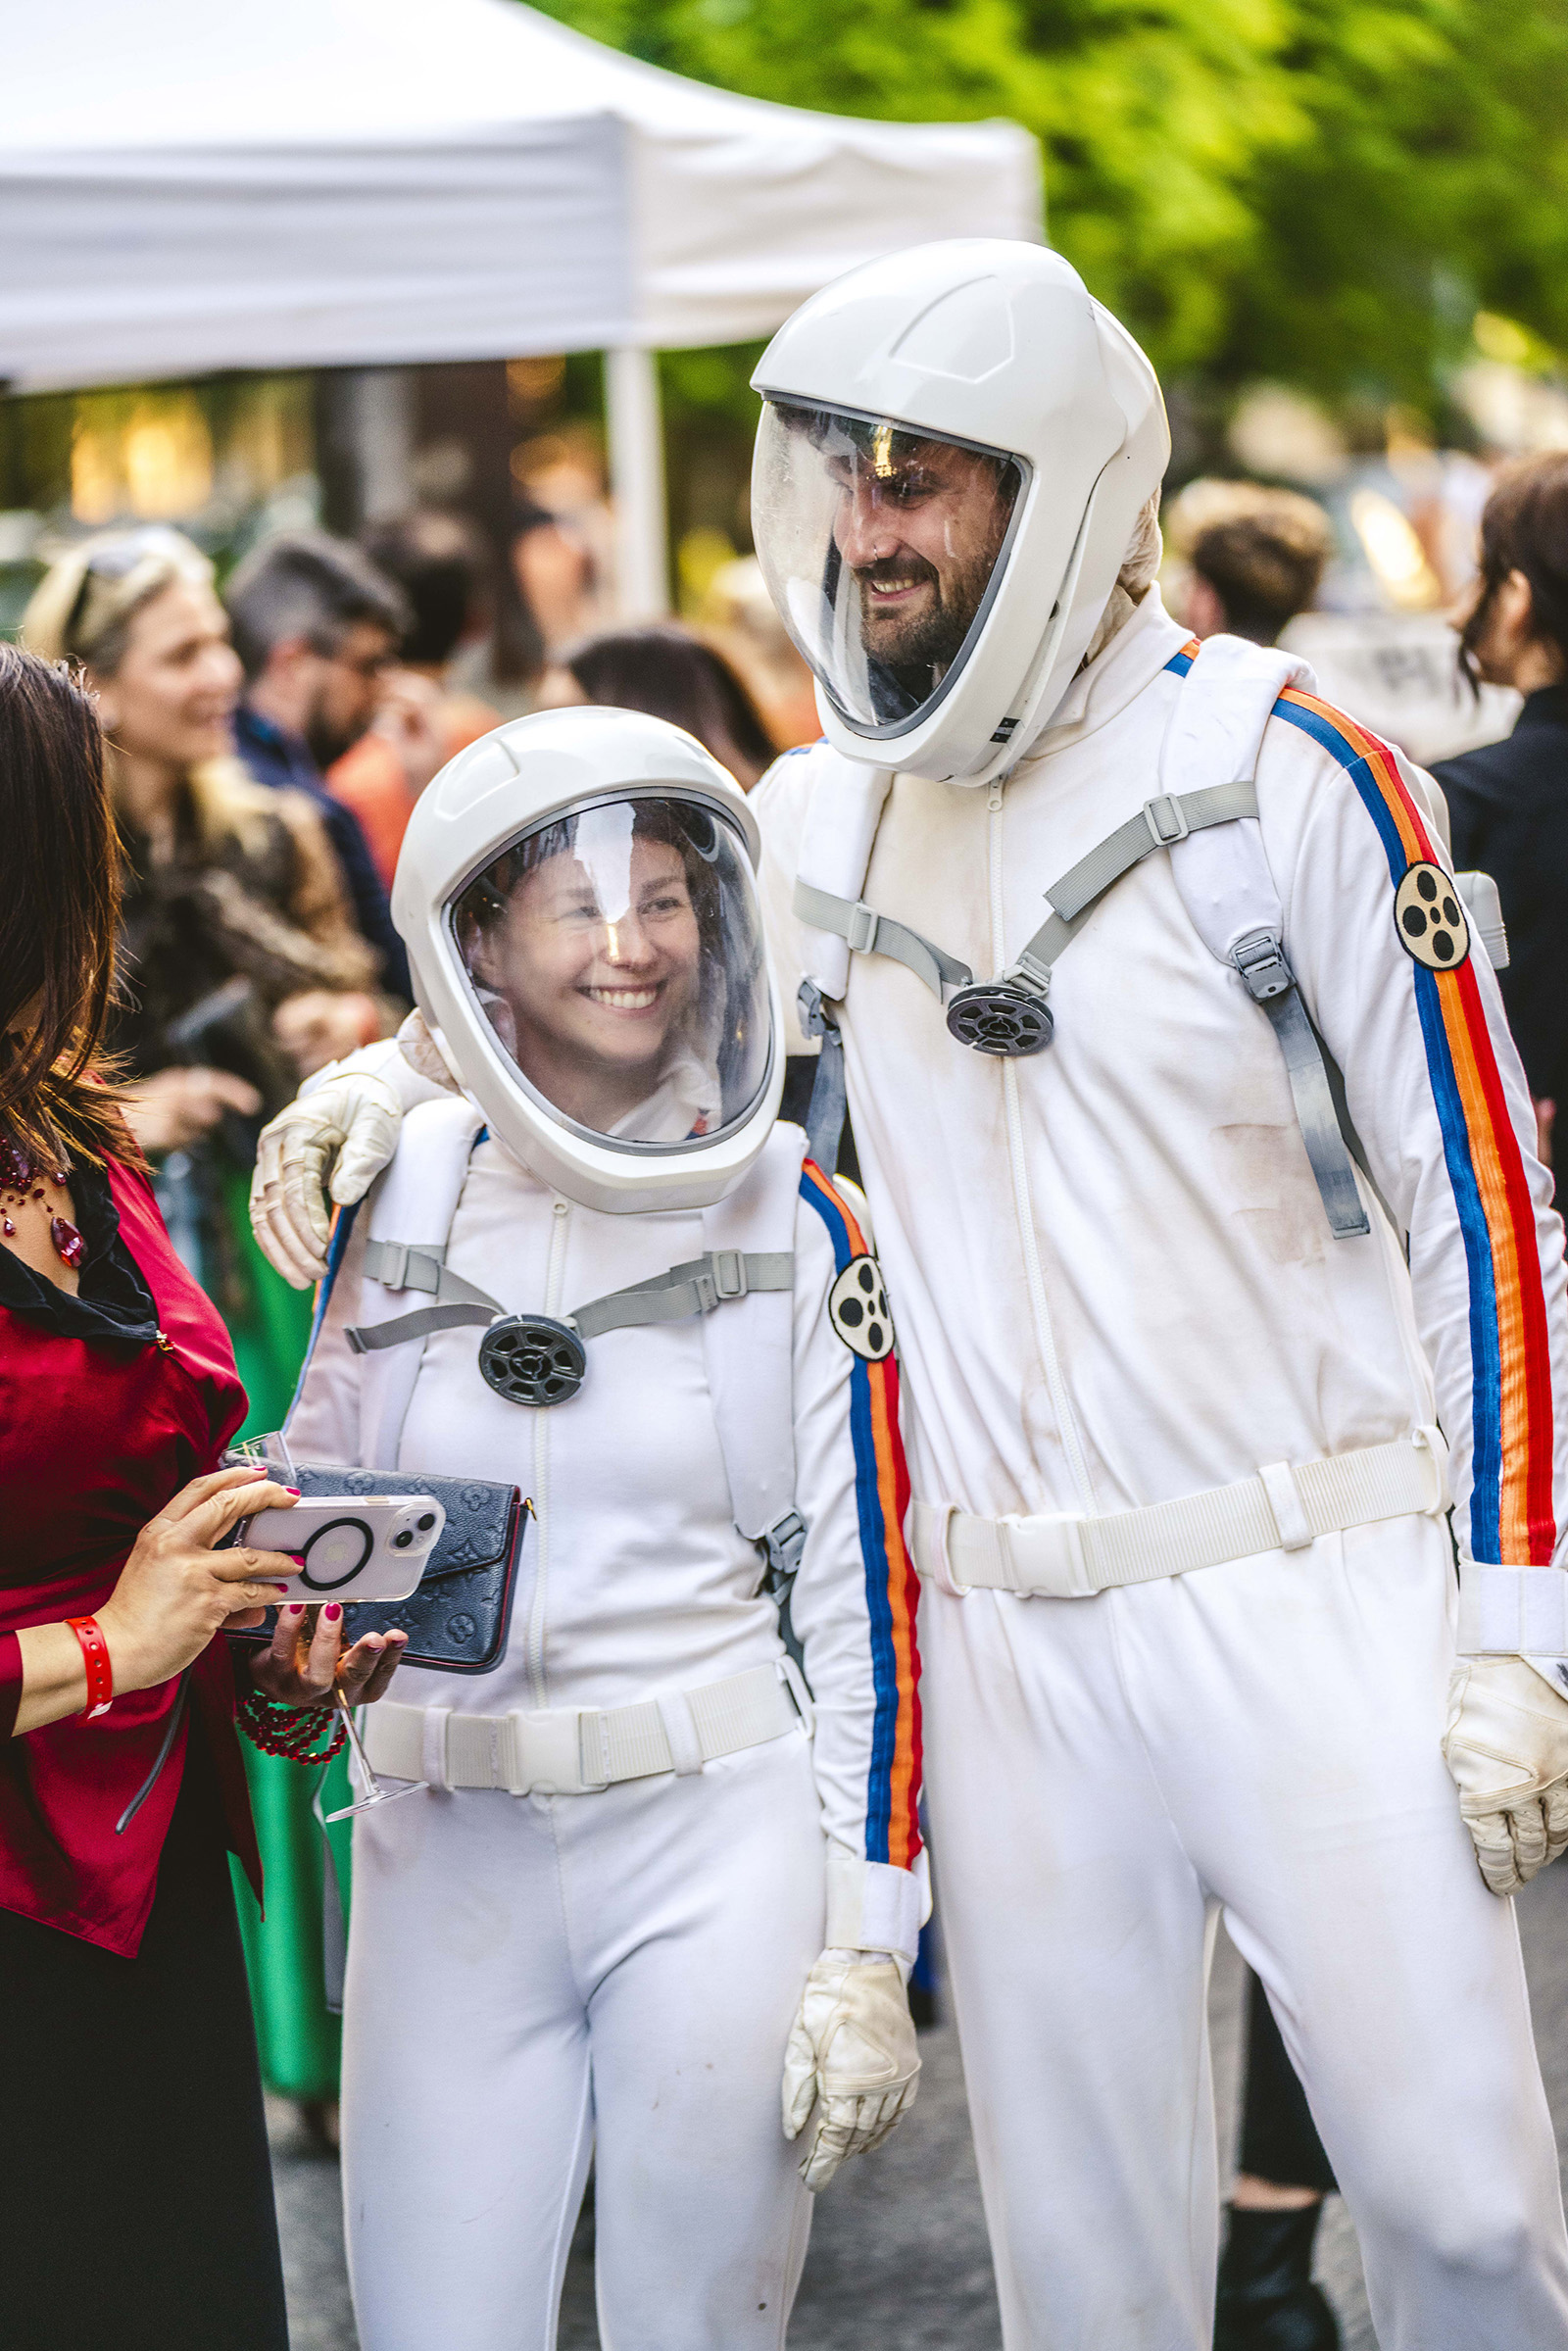 Special guests for Opening Night included astronauts from the actual movieverse, come to life from the festival trailer